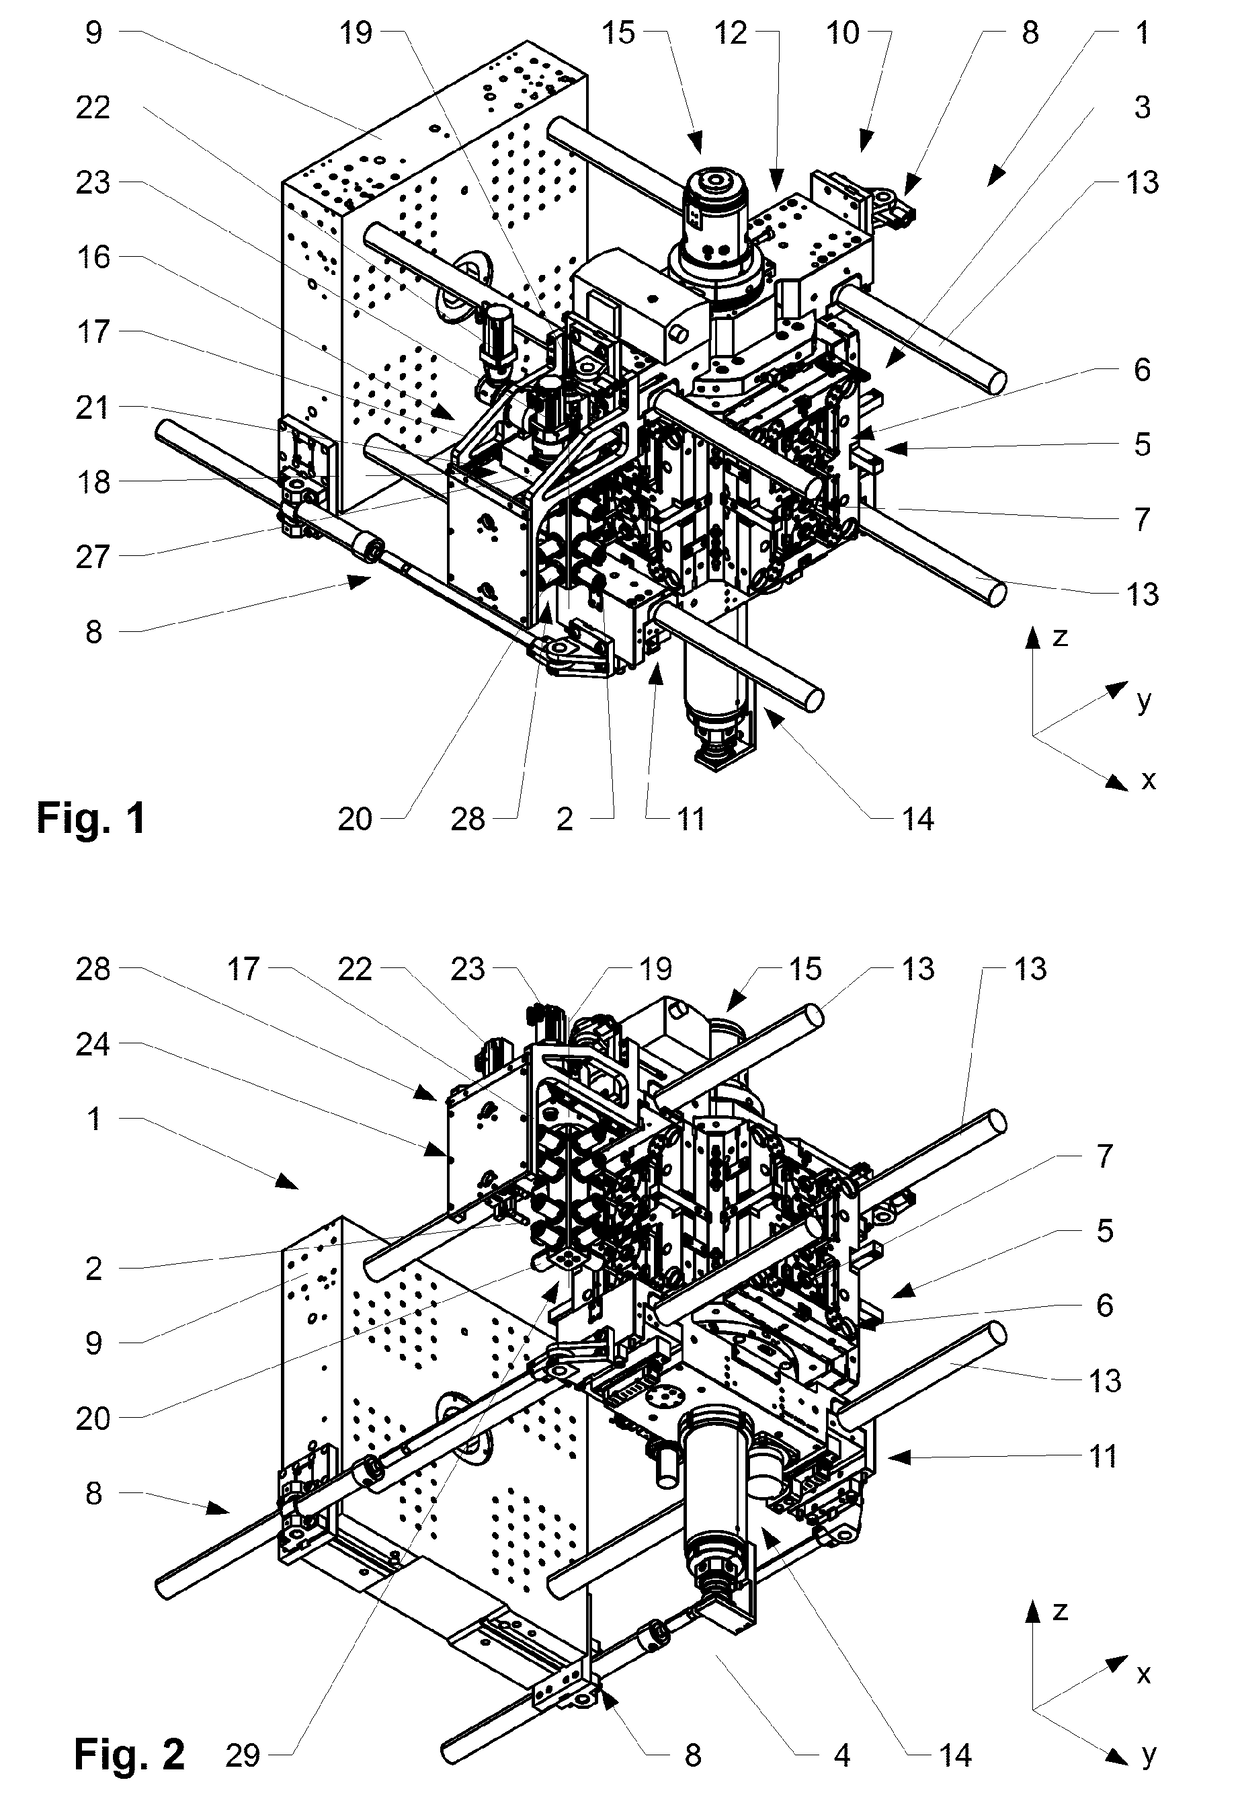 Injection moulding device for producing parts made of plastic